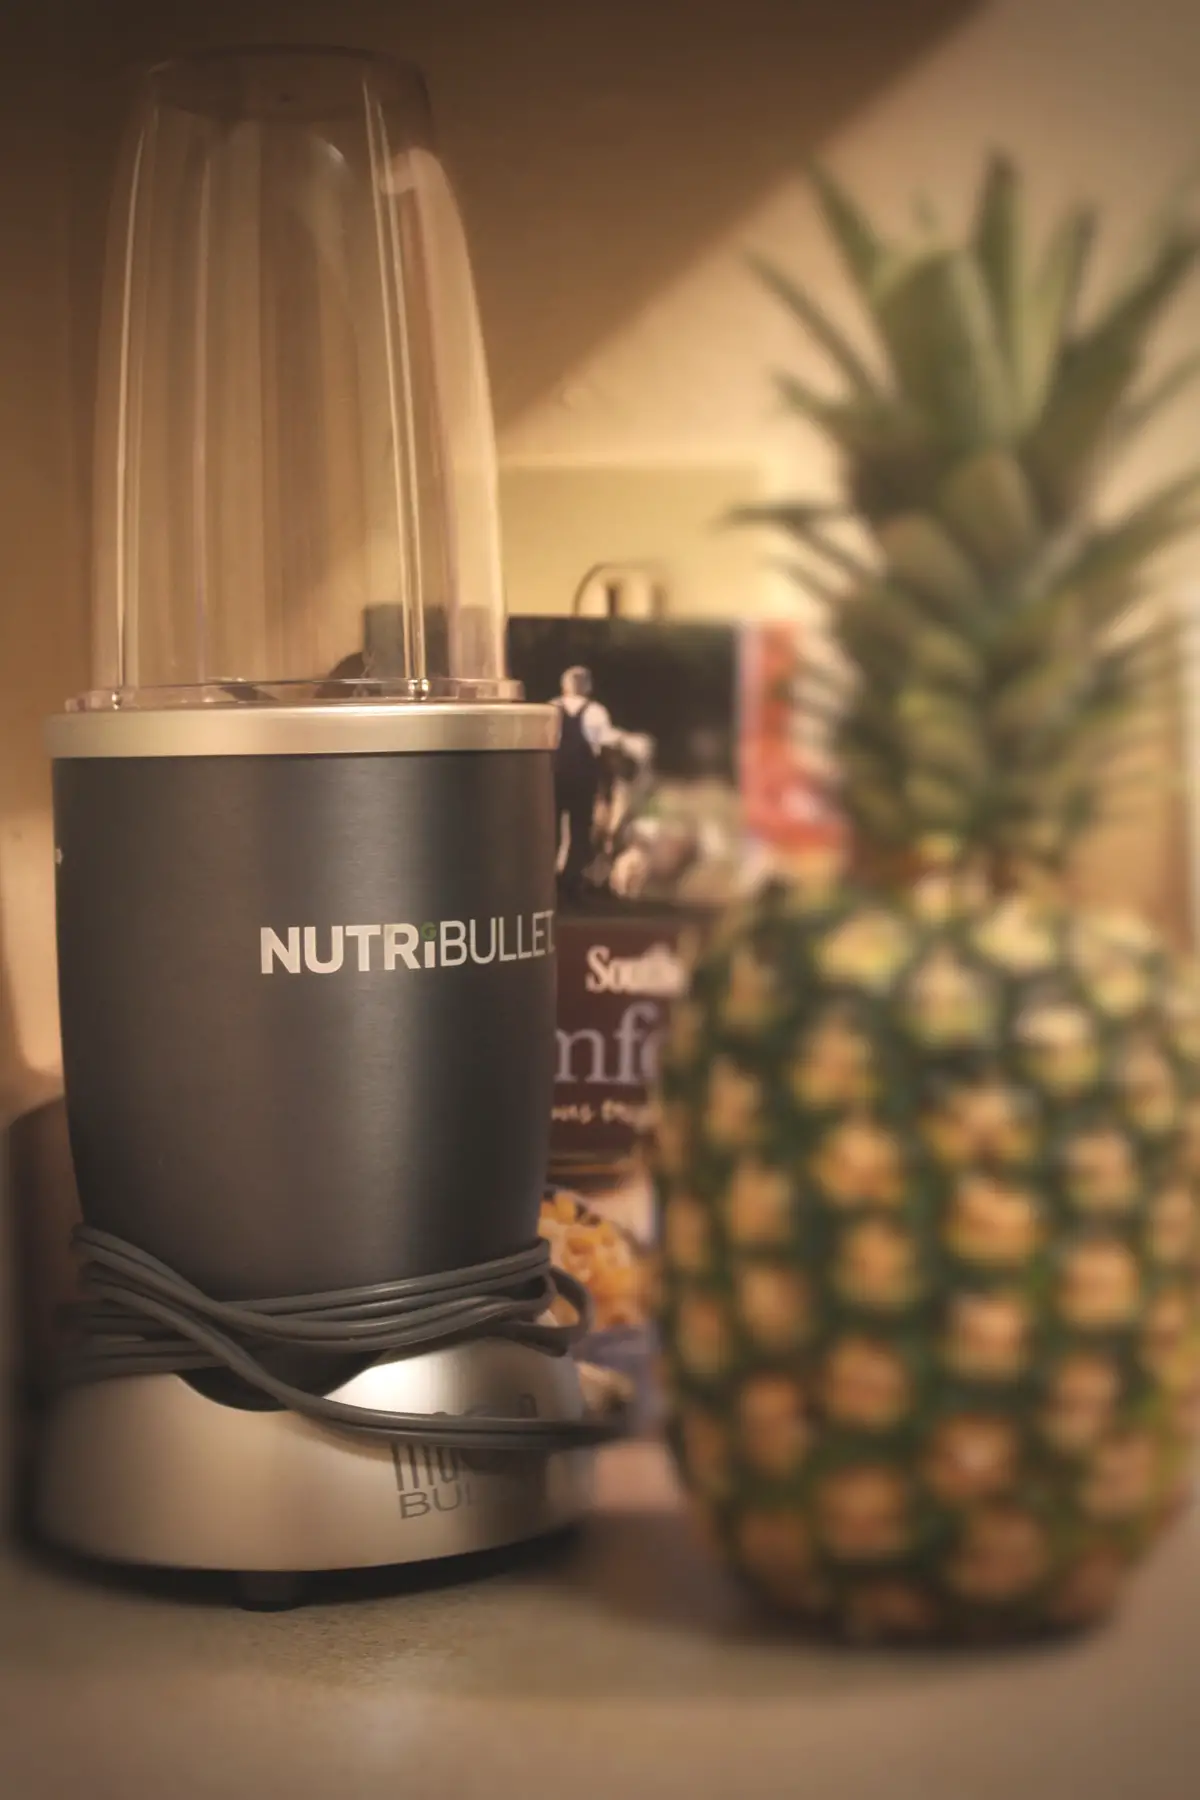 How to Use Nutribullet